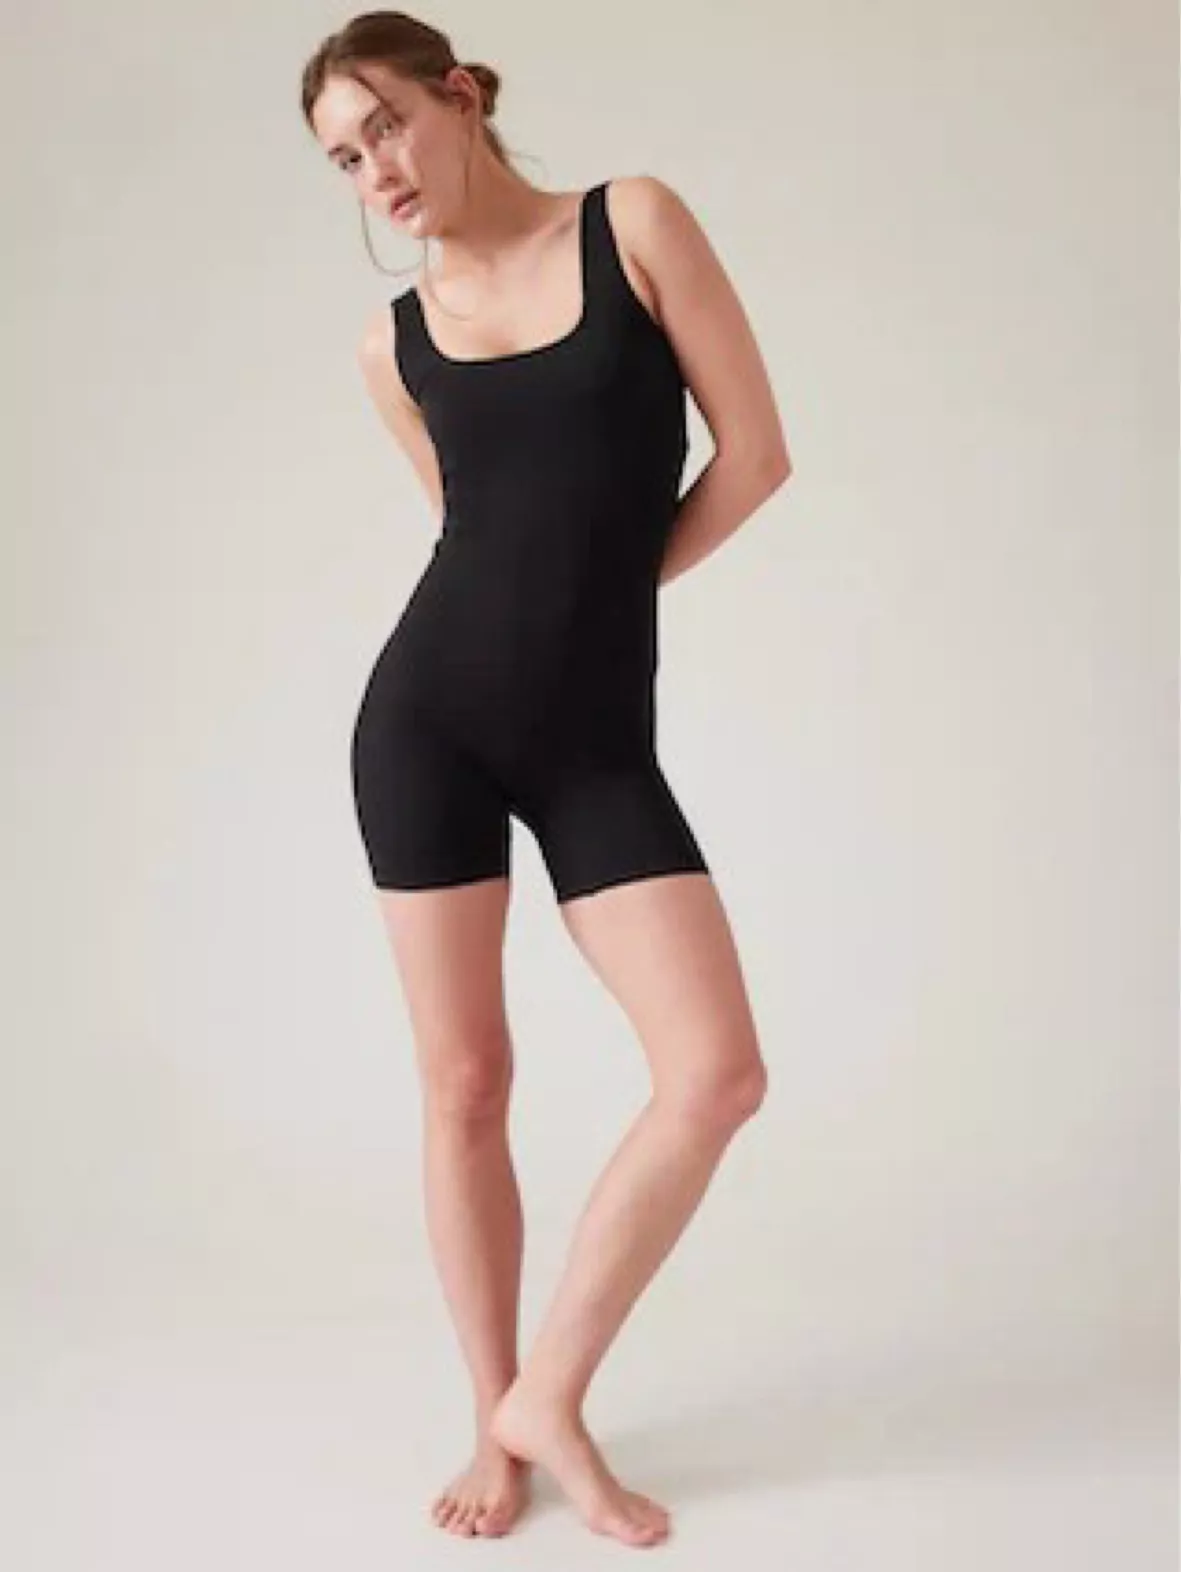 Black unitard outfit  Unitard outfit, Summer workout outfits, Black romper  outfit